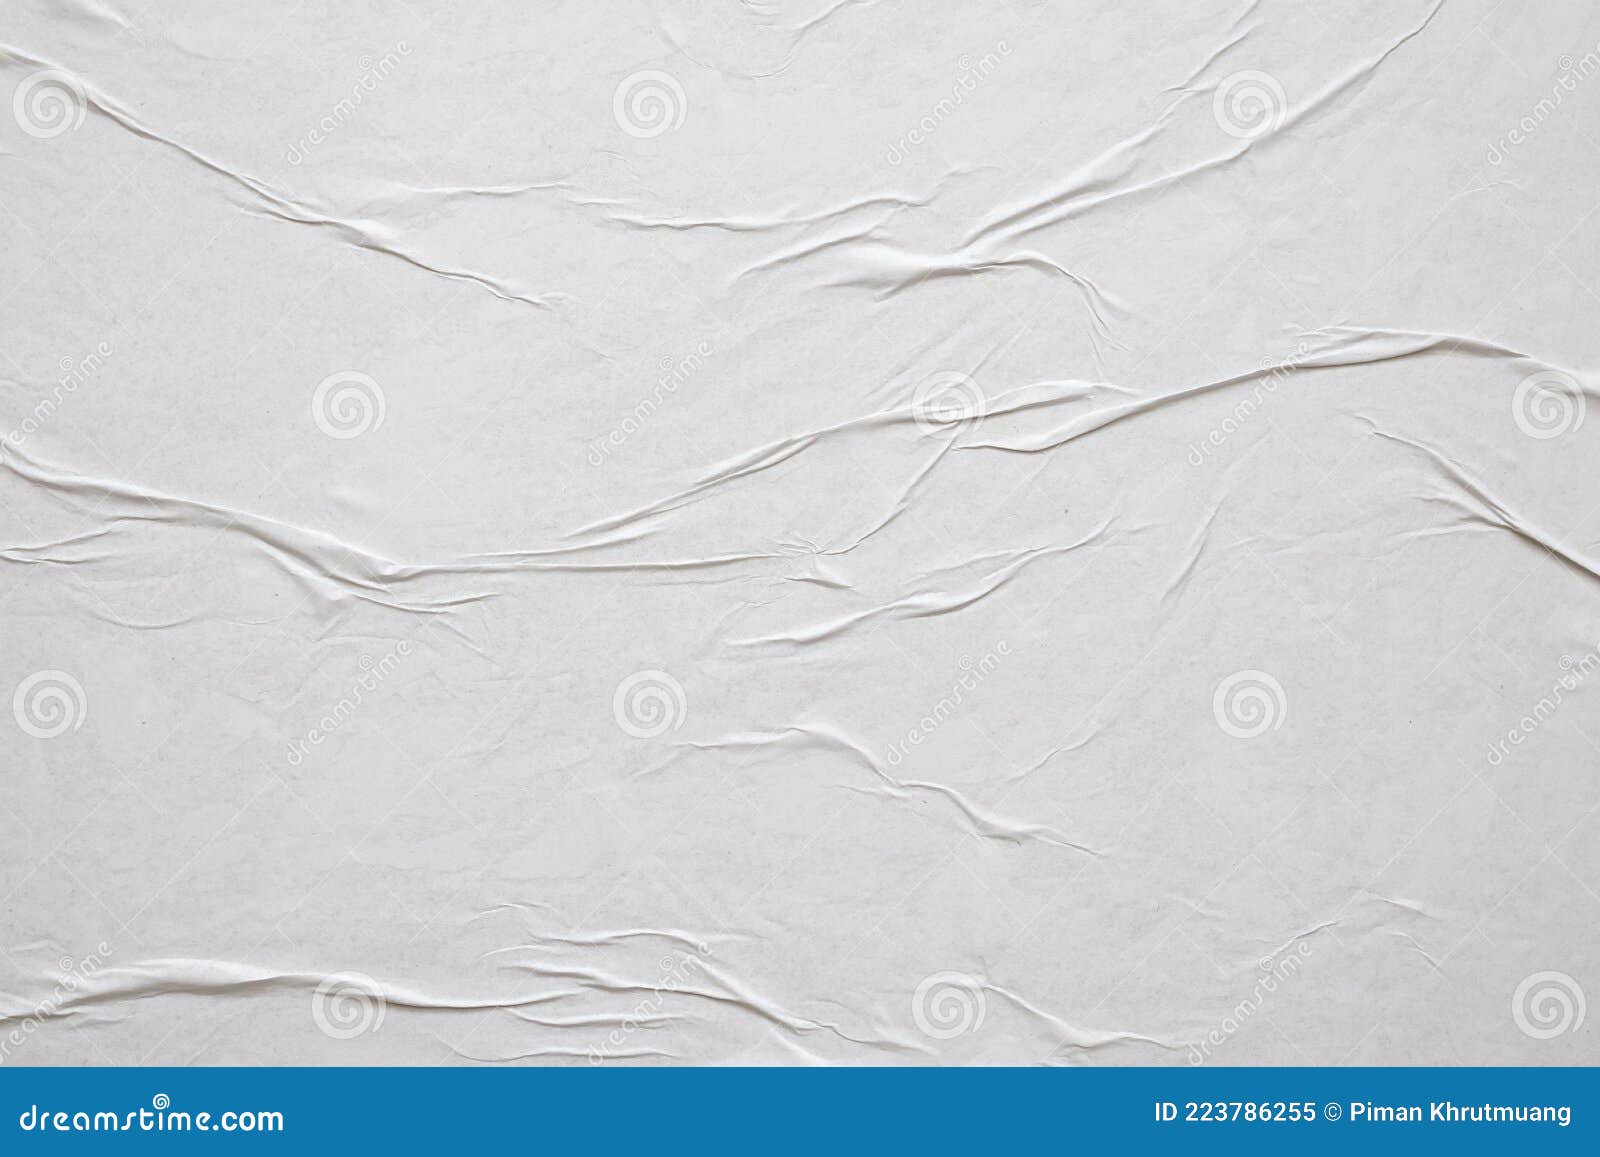 Blank White Crumpled And Creased Paper Poster Texture Background